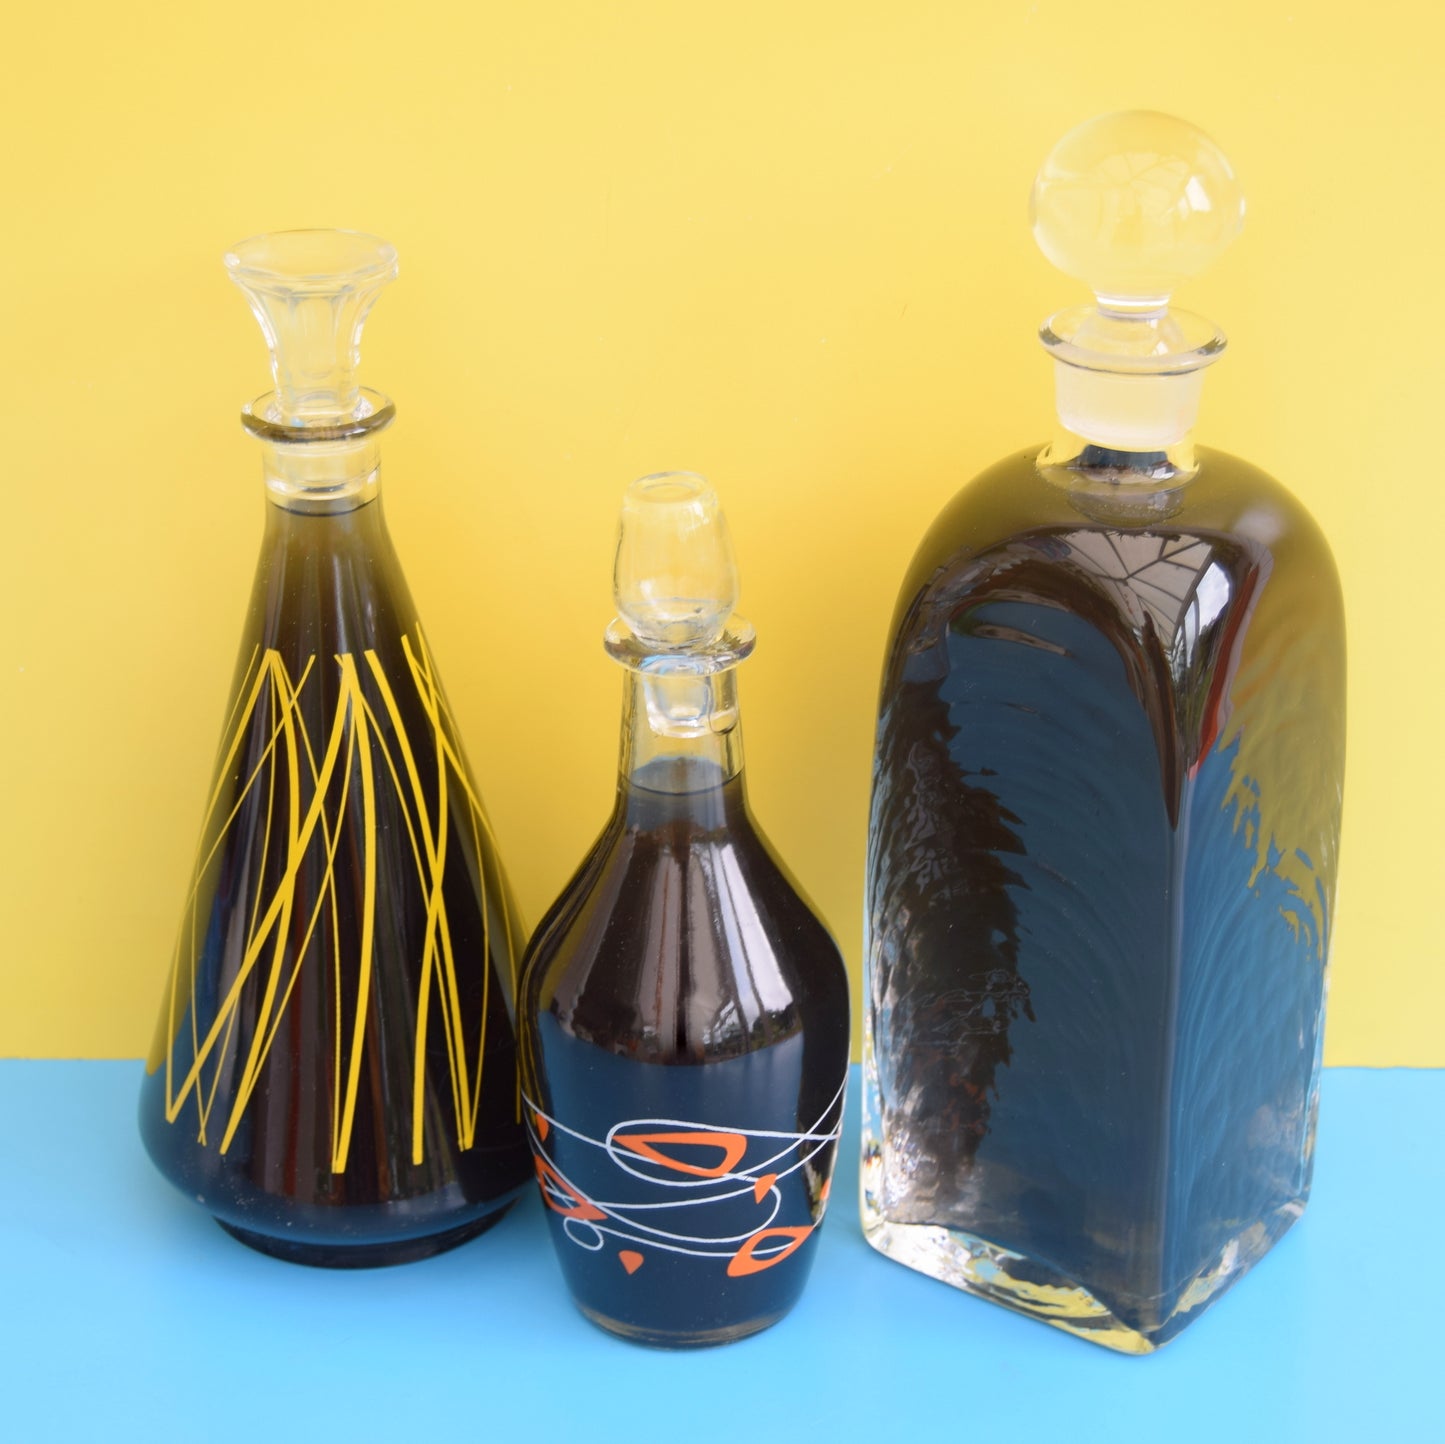 Vintage 1950s Glass Decanters - Ideal Home Bar / Bubble Bath Gift ?